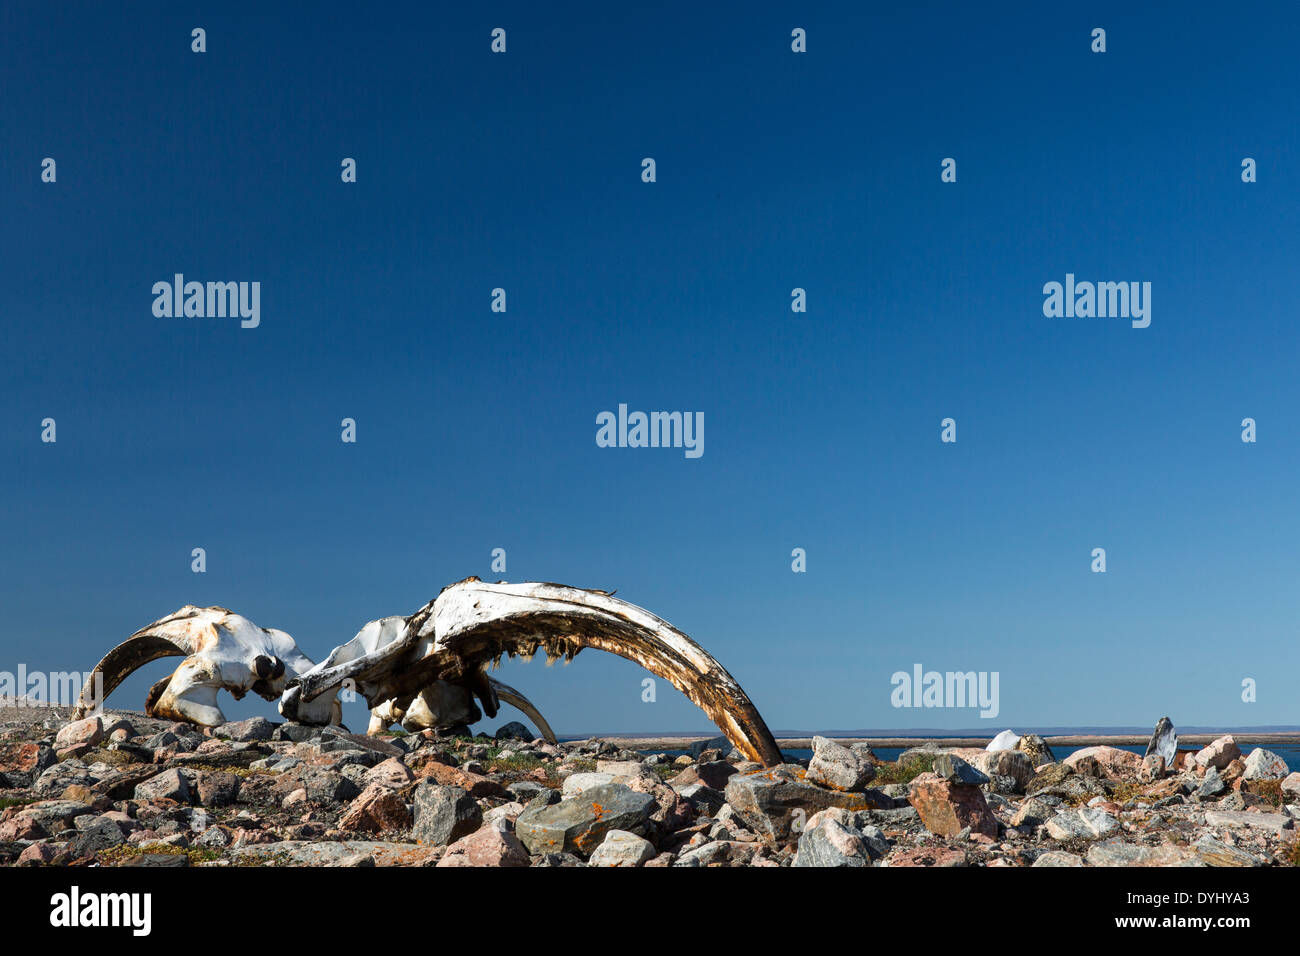 Canada, Nunavut Territory, Repulse Bay, Bowhead whale remains on Harbour Islands Stock Photo